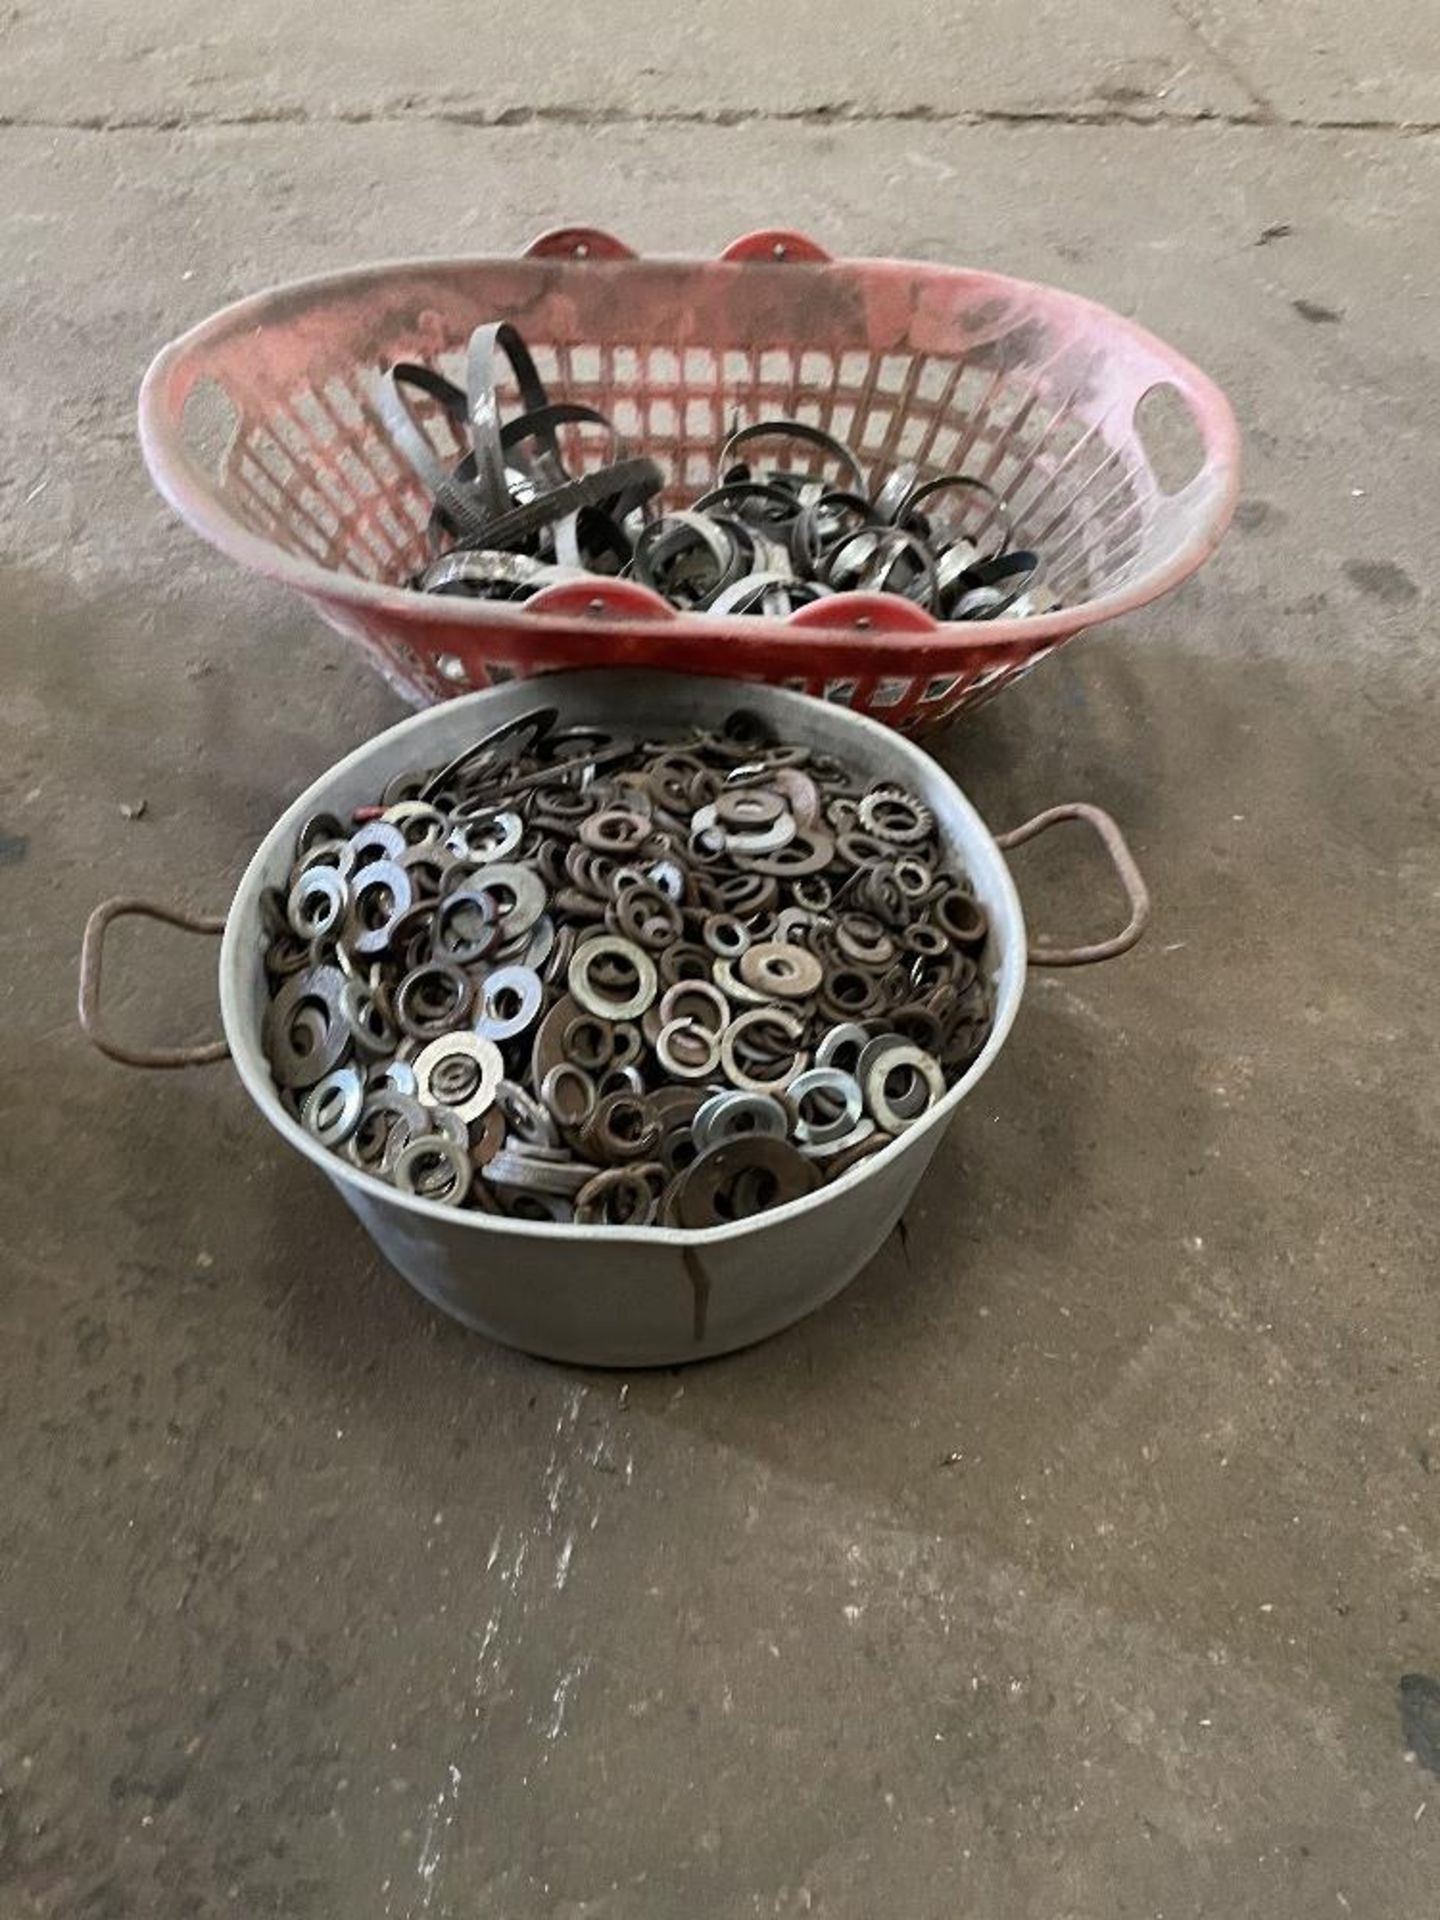 Bucket of Washers and Jubilee Clips